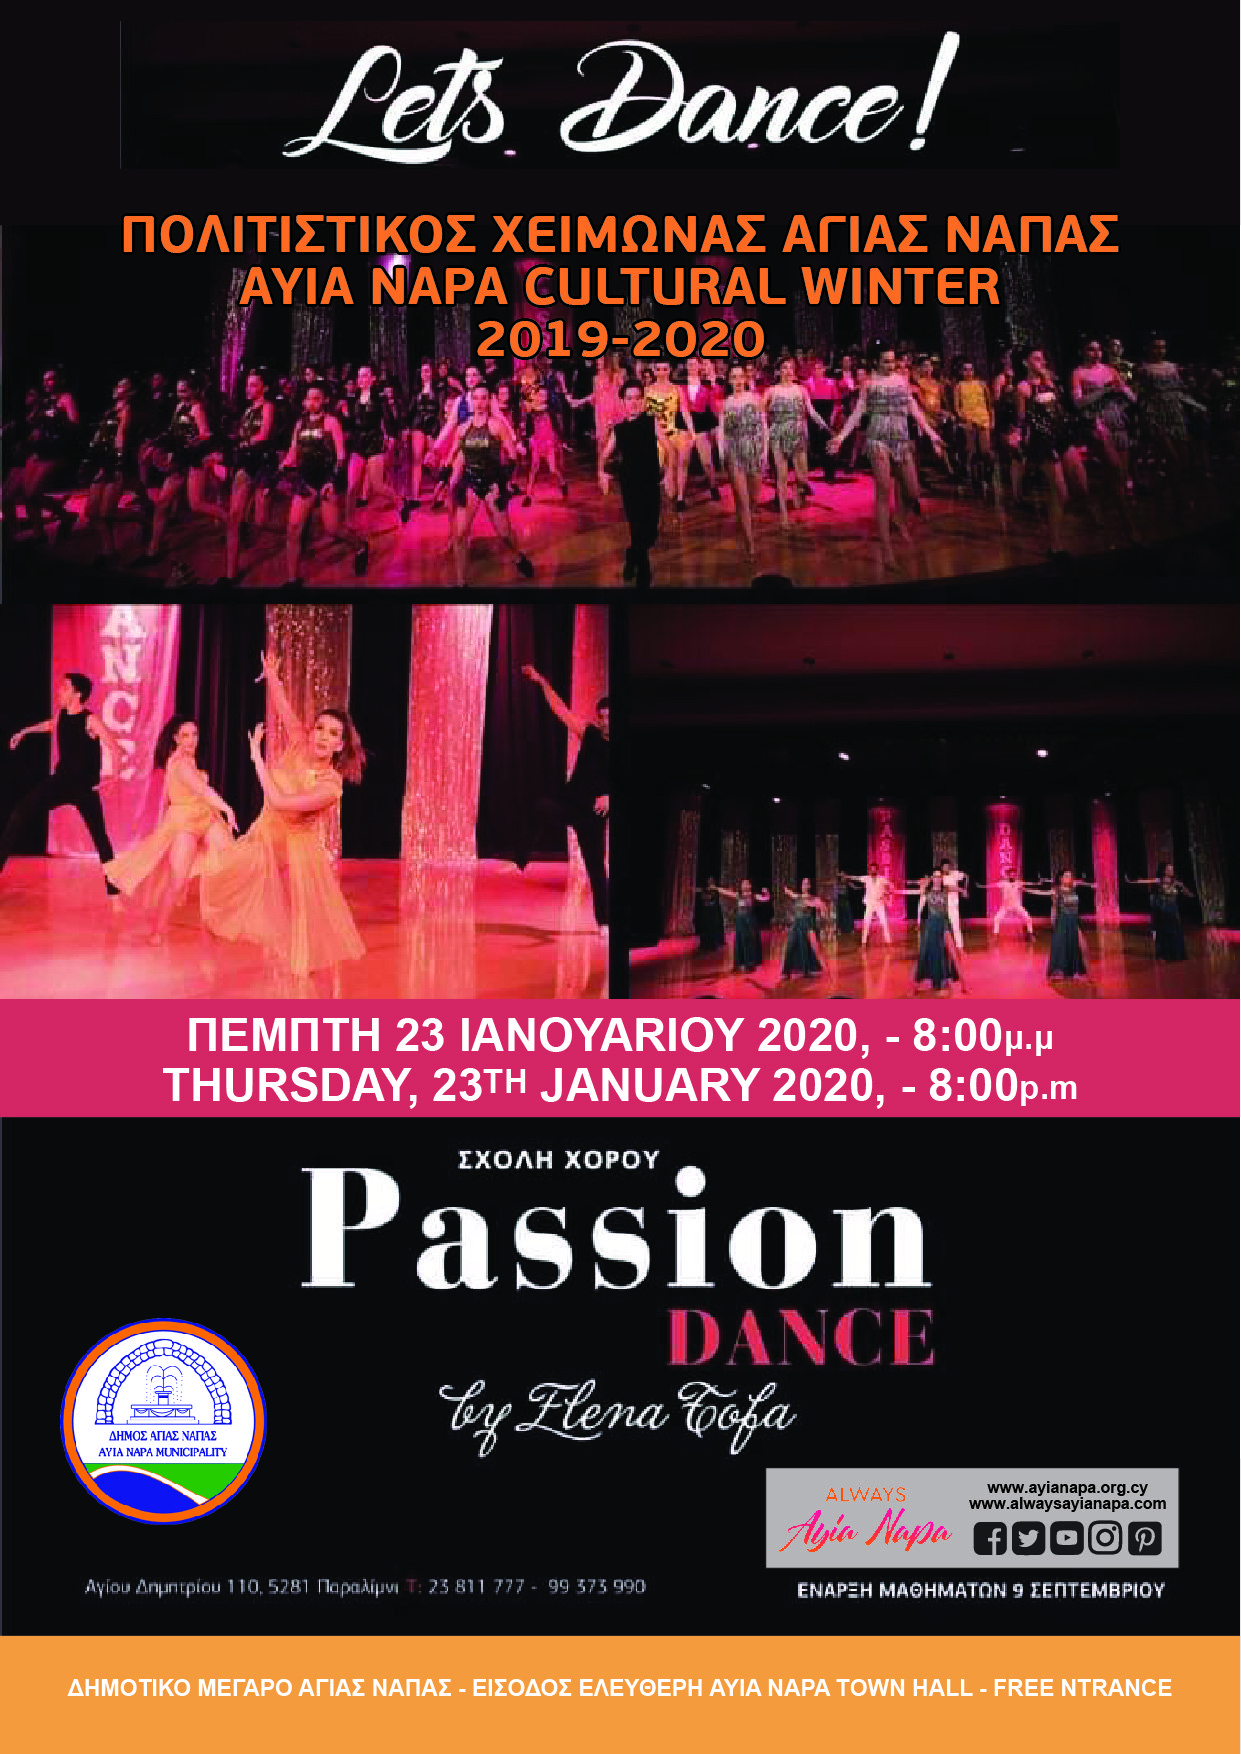 23 january new 01 Let's dance, Ayia Napa Municipality, modern dances, Ayia Napa Cultural Winter, Ministry of Tourism